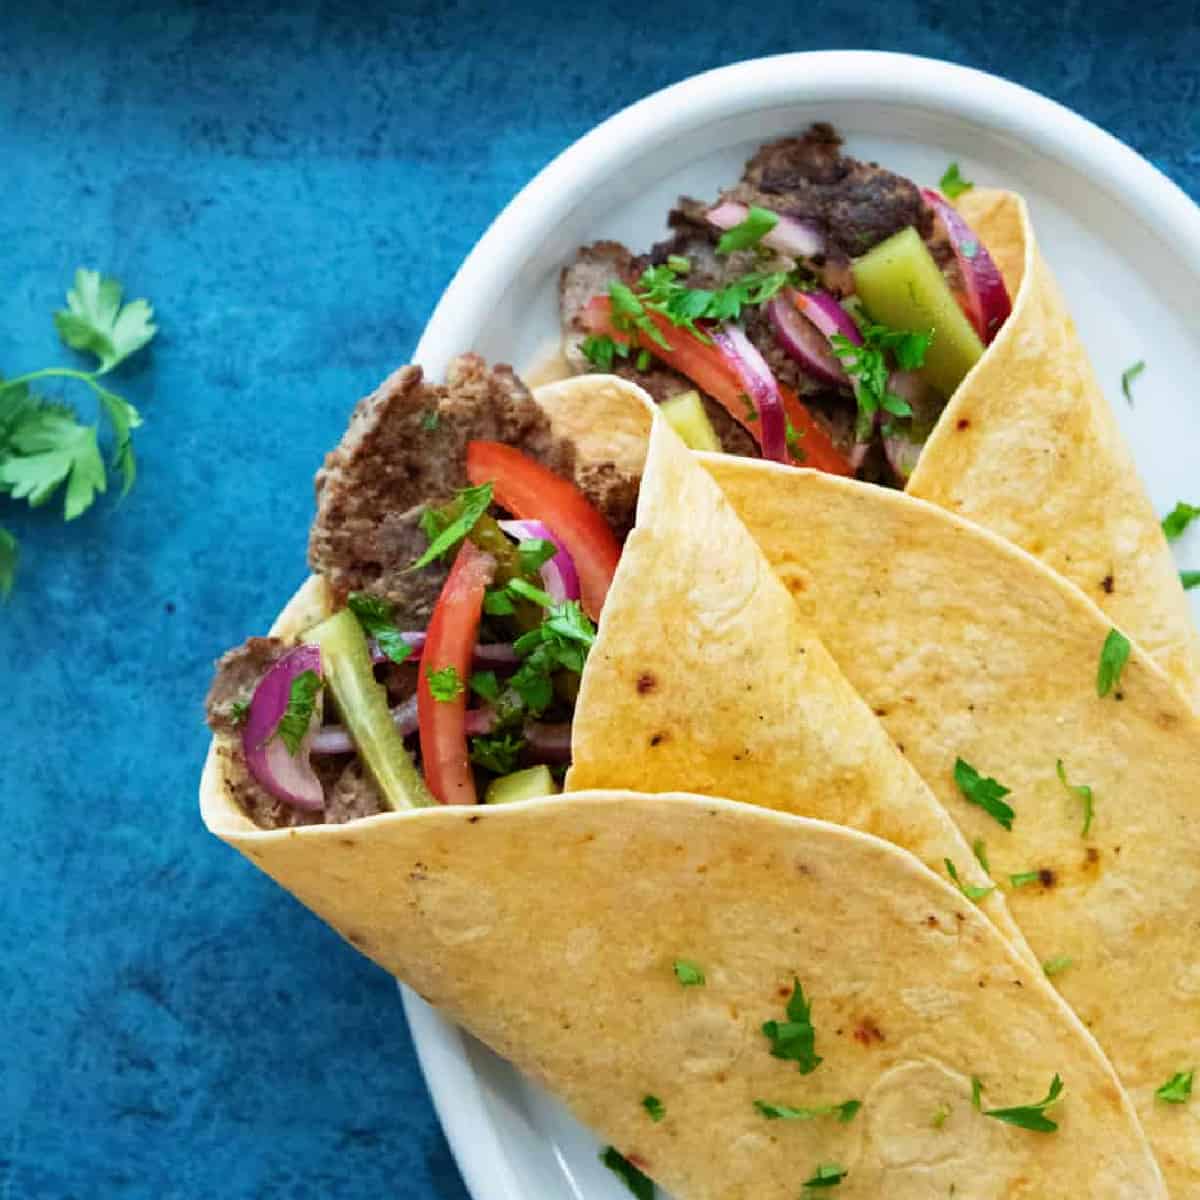 Ready to try the best doner kebab recipe? This homemade Turkish döner kebab is juicy and packed with so much flavor. With one simple technique, you can make this classic Turkish street food at home with just a few ingredients!
